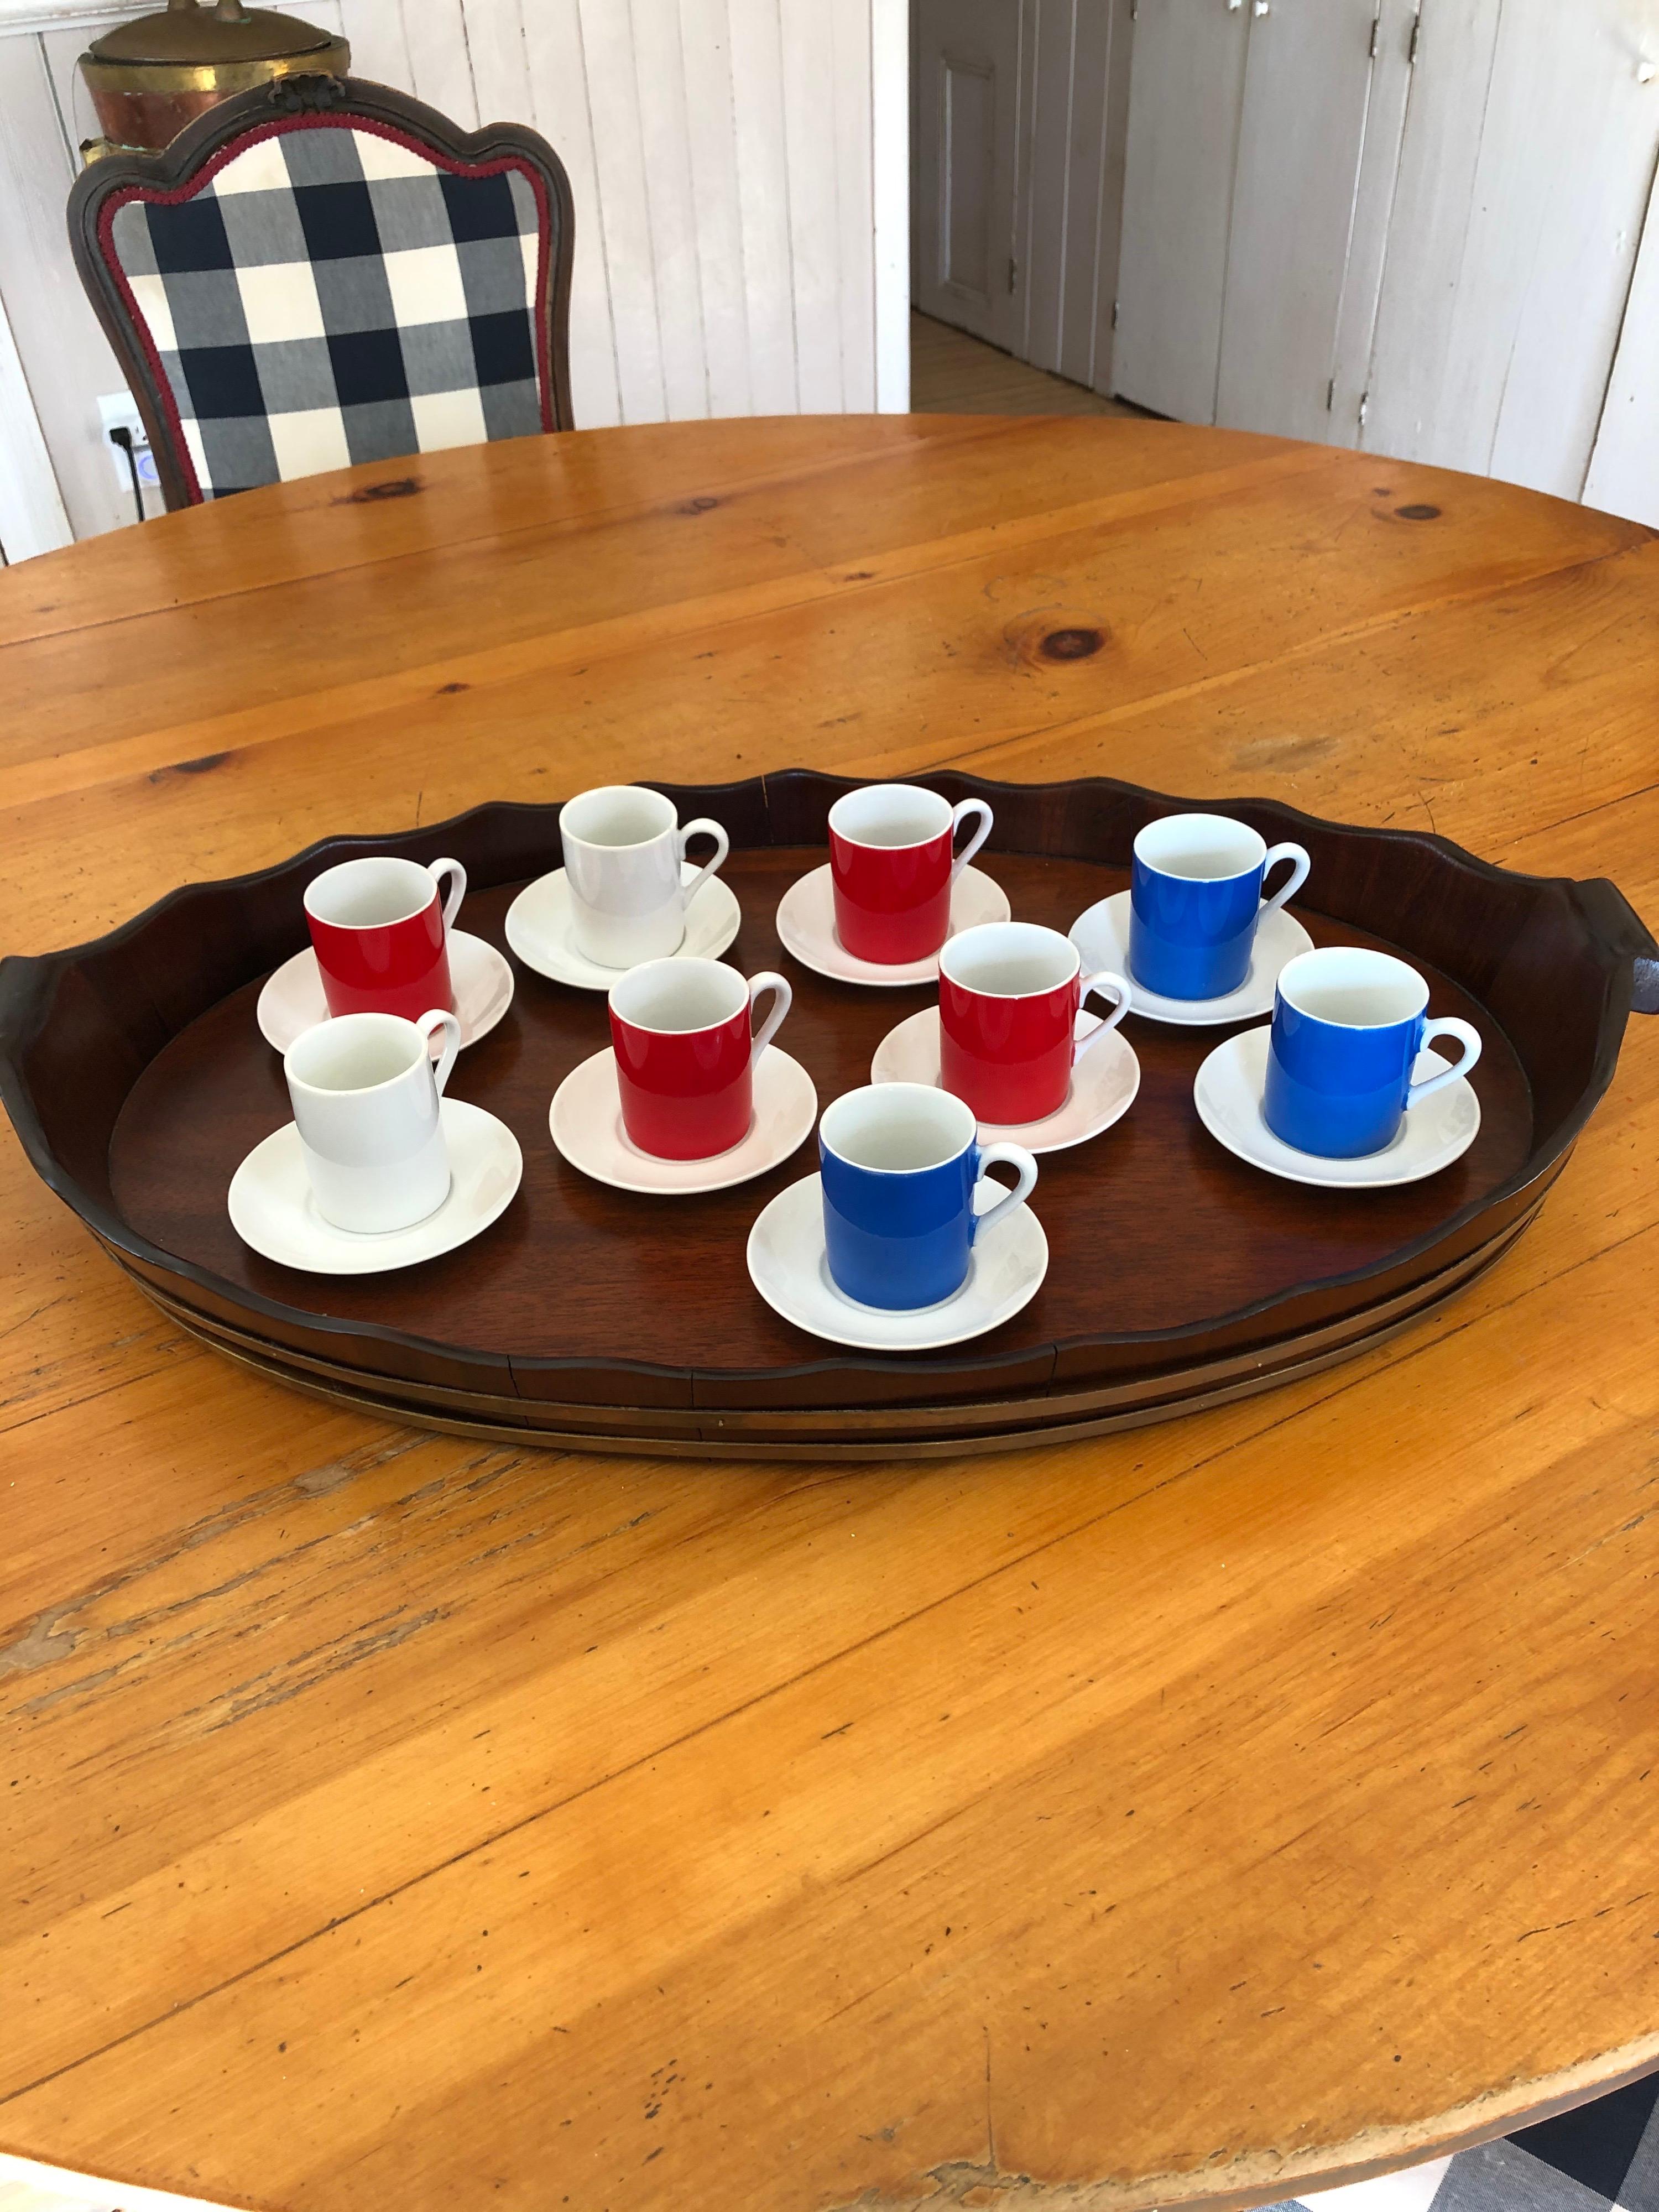 Set of 9 demitasse cups and saucers. 4 red cups, 3 blue and 2 white cups all with white saucers. Total of 18 pieces, circa 1960. Originally purchased at Azuma NYC on Lexington Avenue. Alas long gone. Measure below is for the saucers. The cups